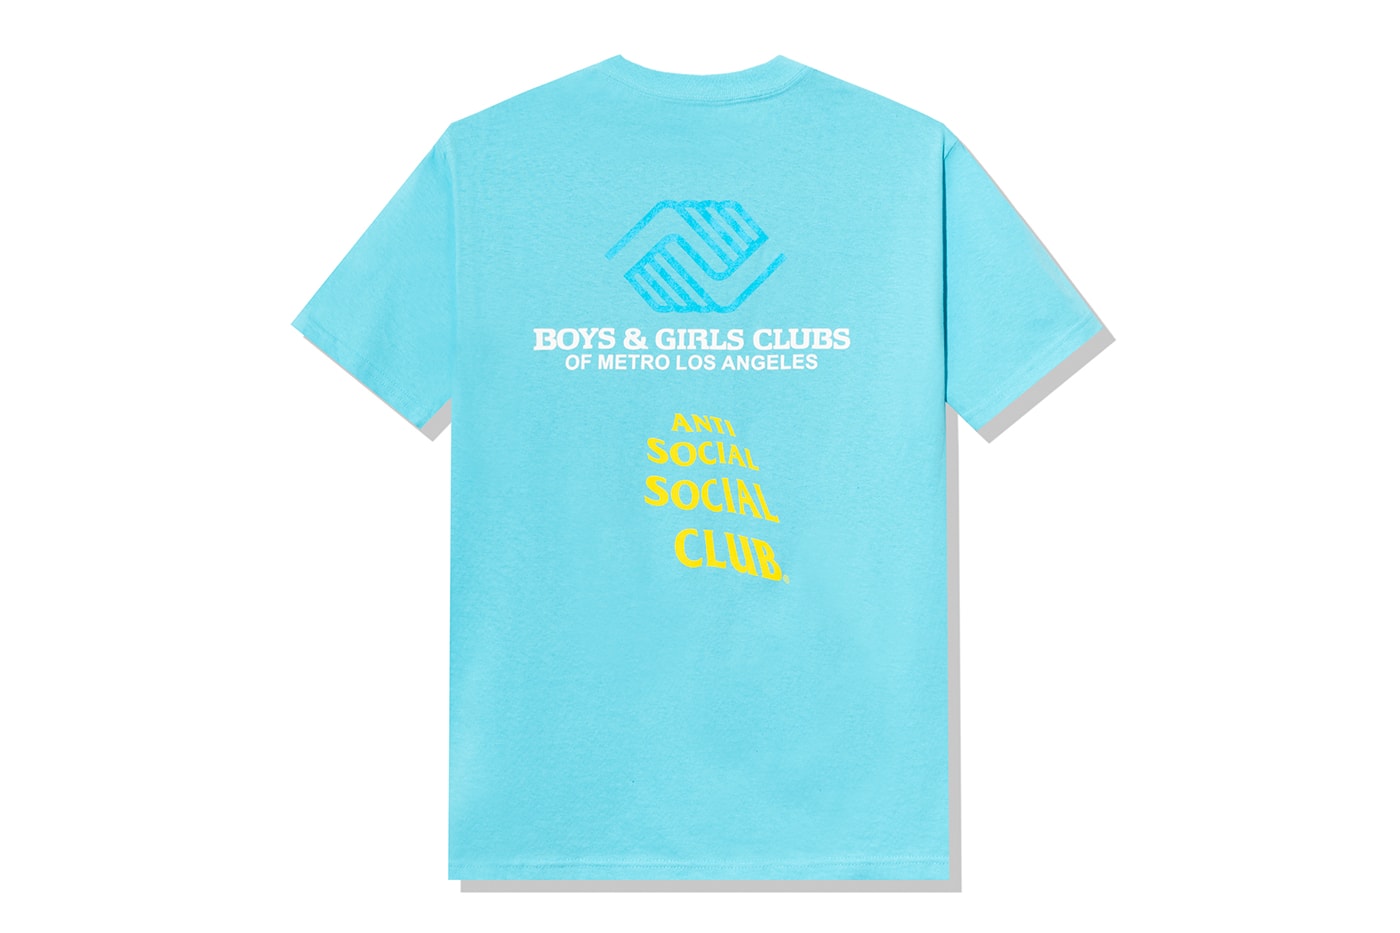 Boys & Girls Clubs of Metro Los Angeles Anti Social Social Club Mental Health Awareness Month Collection